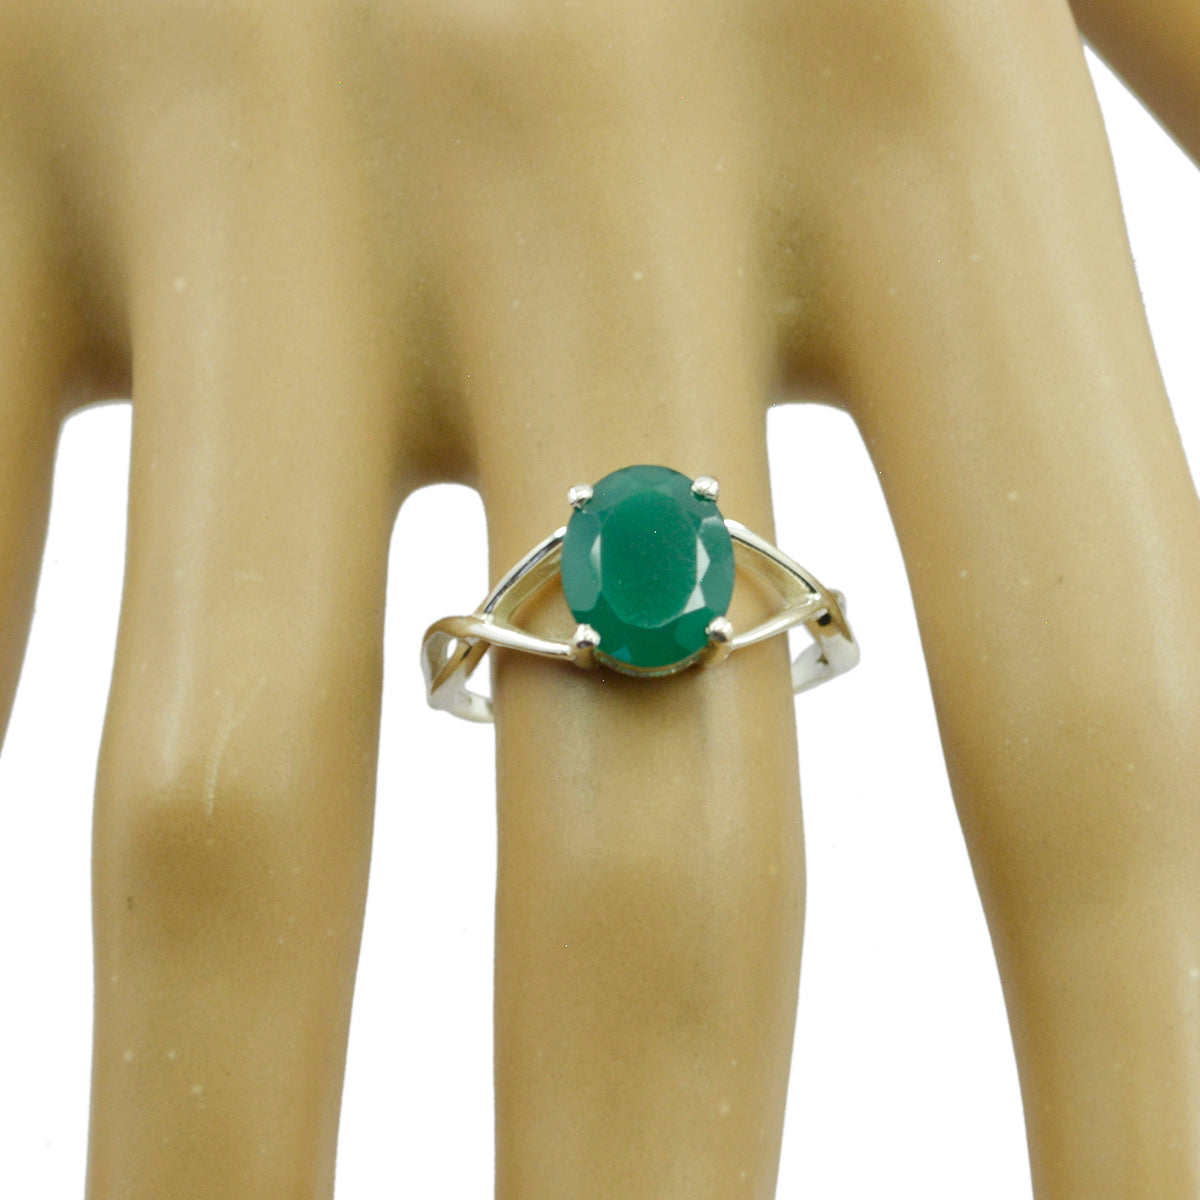 Mesmeric Stone Green Onyx Sterling Silver Ring Jewelry Box For Girl